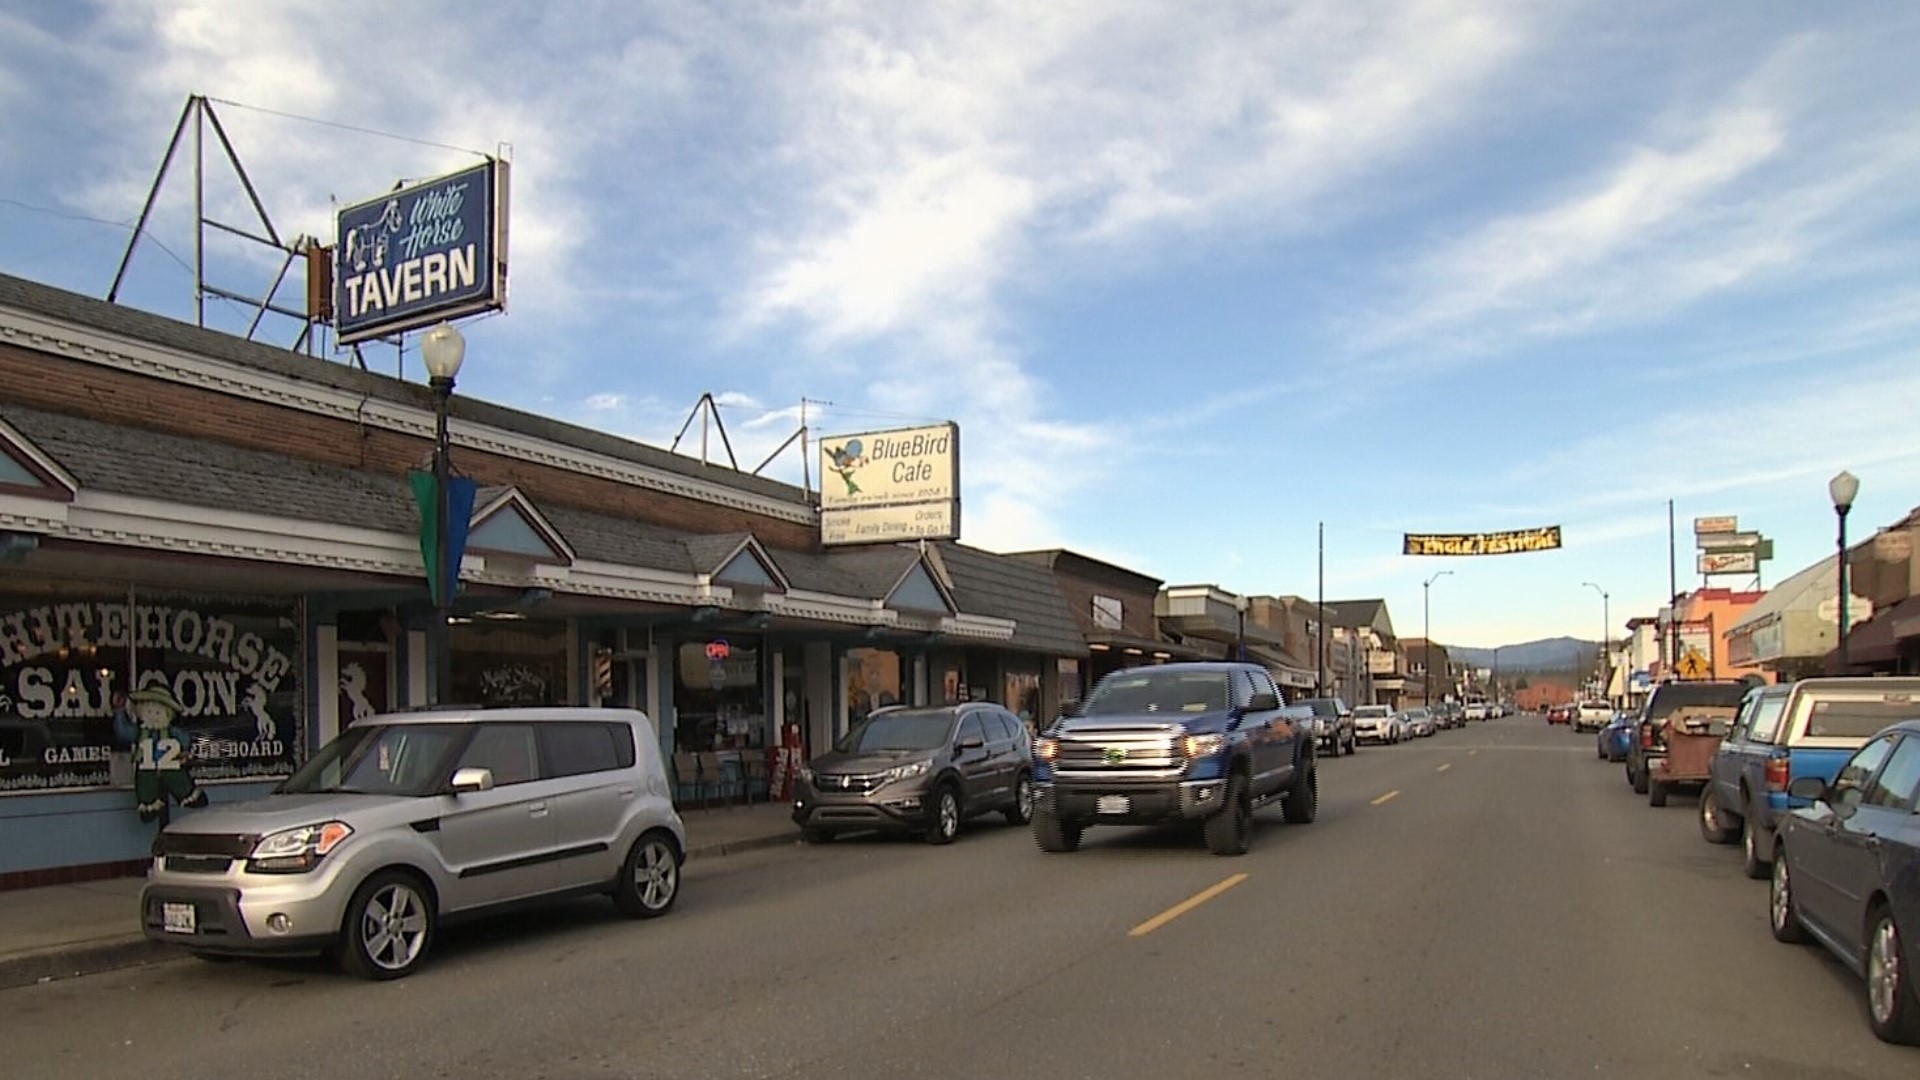 Olympic Avenue is lined with small, locally-owned businesses